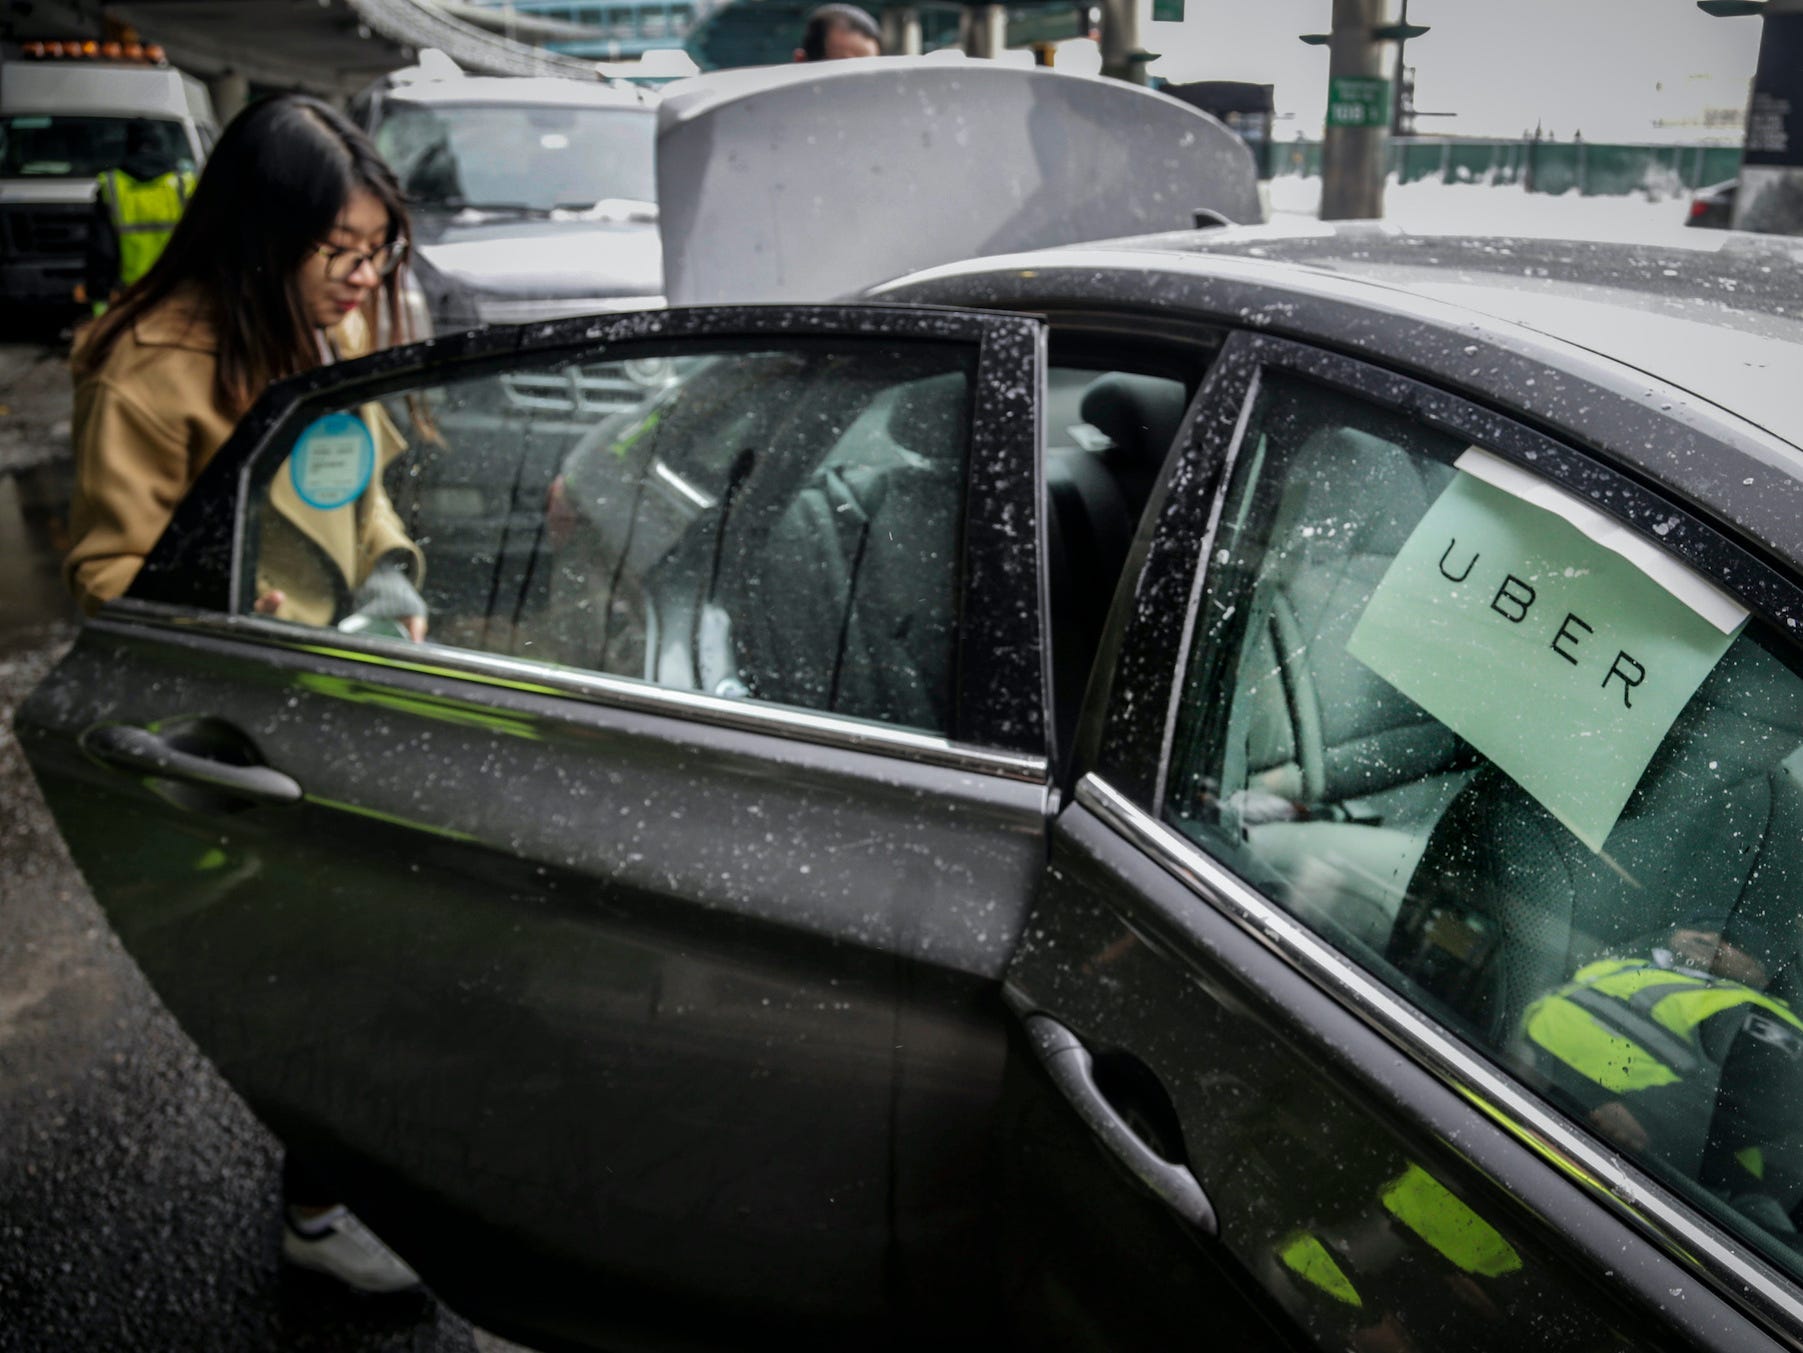 A passenger enters an Uber at LaGuardia Airport in New York, March 15, 2017.